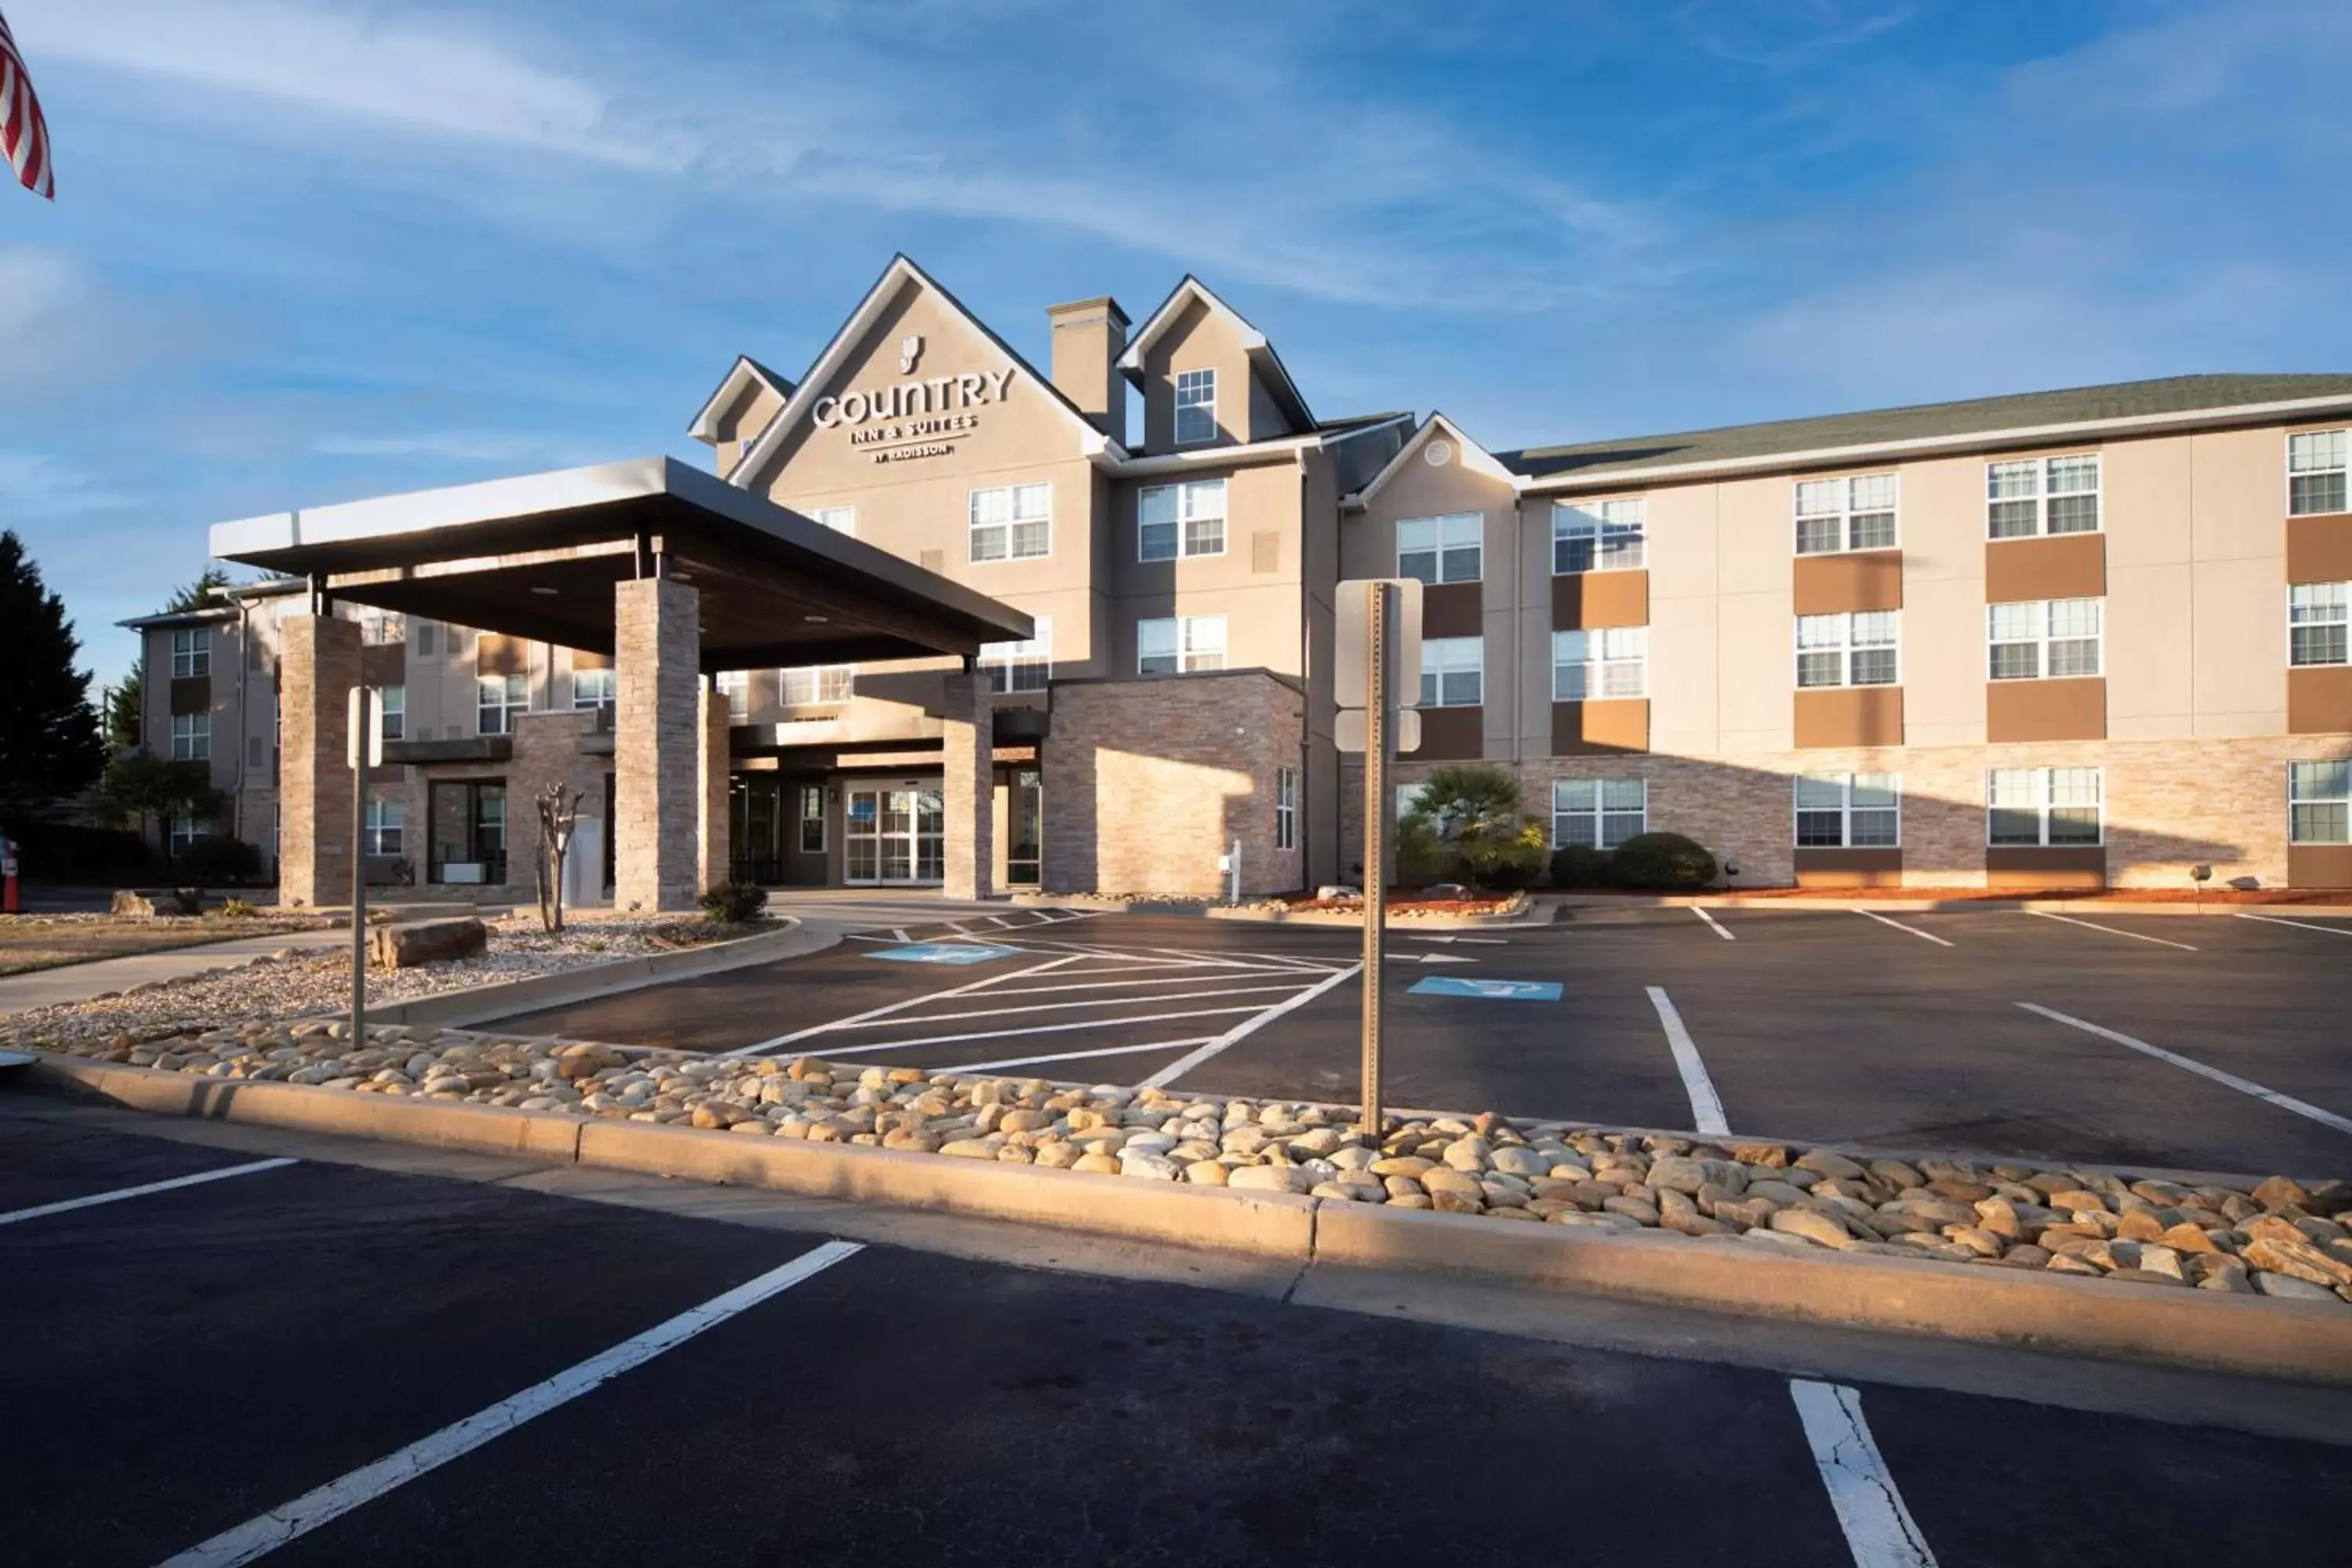 Property building in Country Inn & Suites by Radisson, Stone Mountain, GA